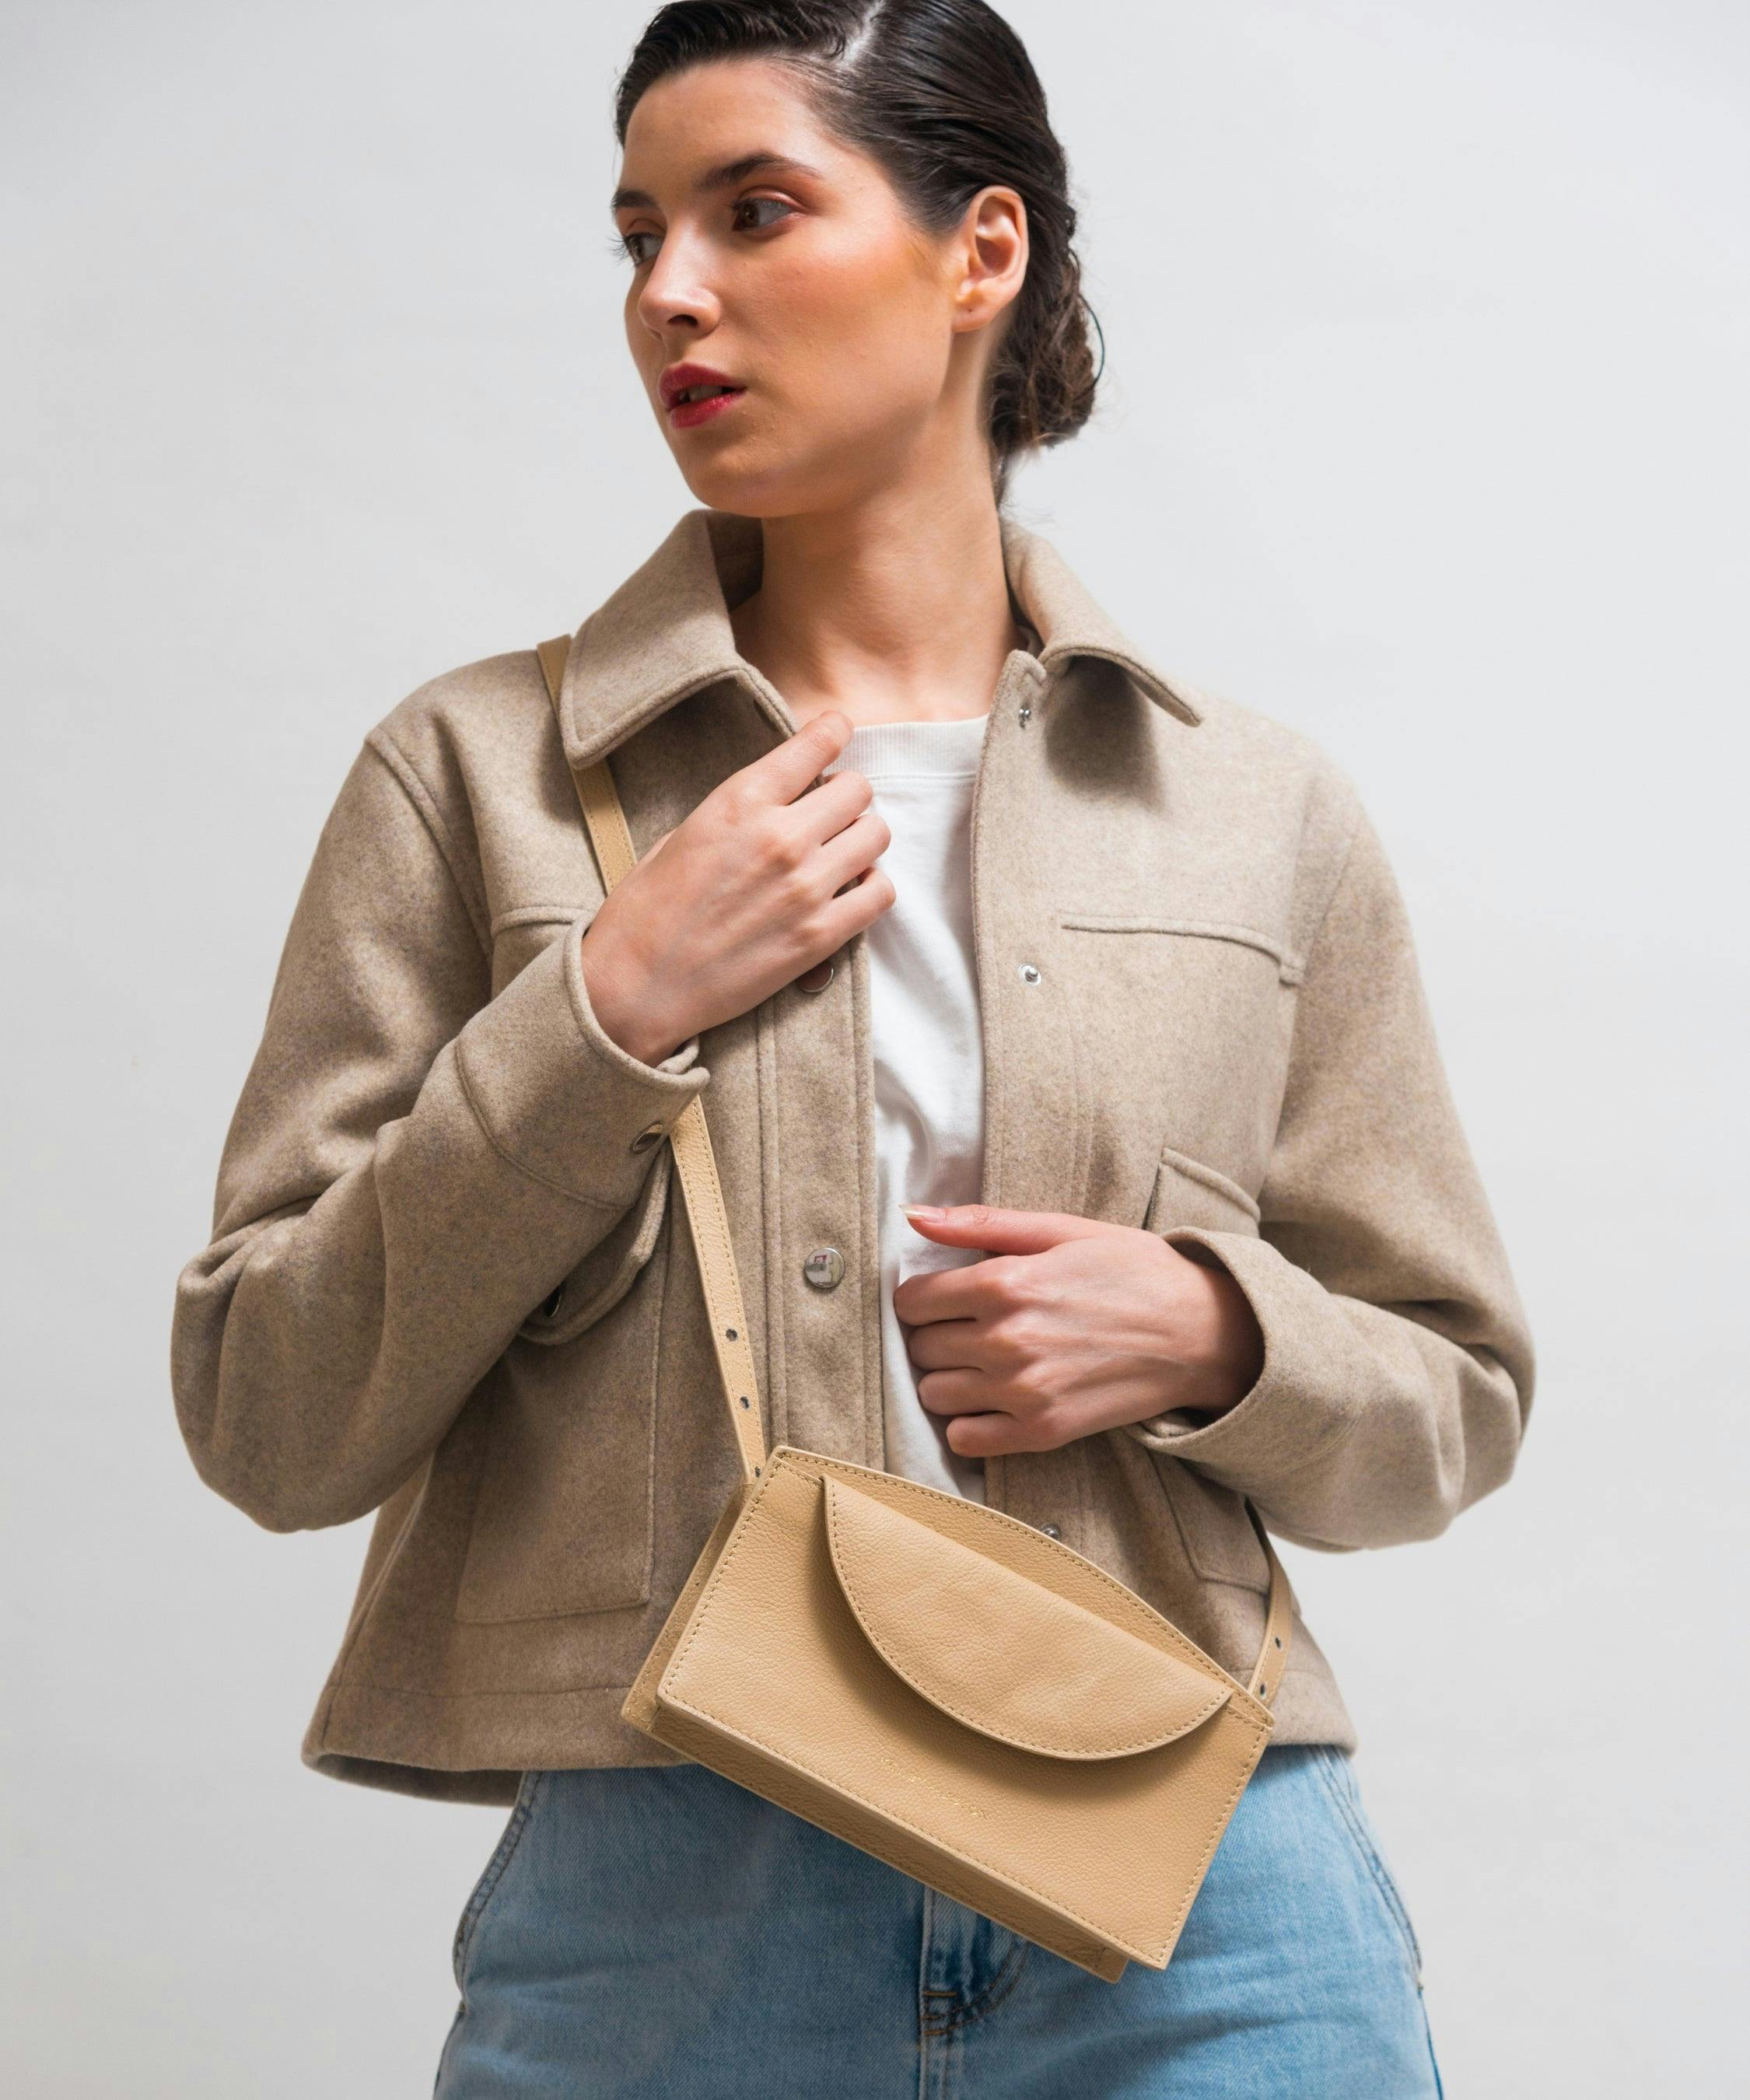 ASTER CROSSBODY BAG - BEIGE, a product by Kelby Huston